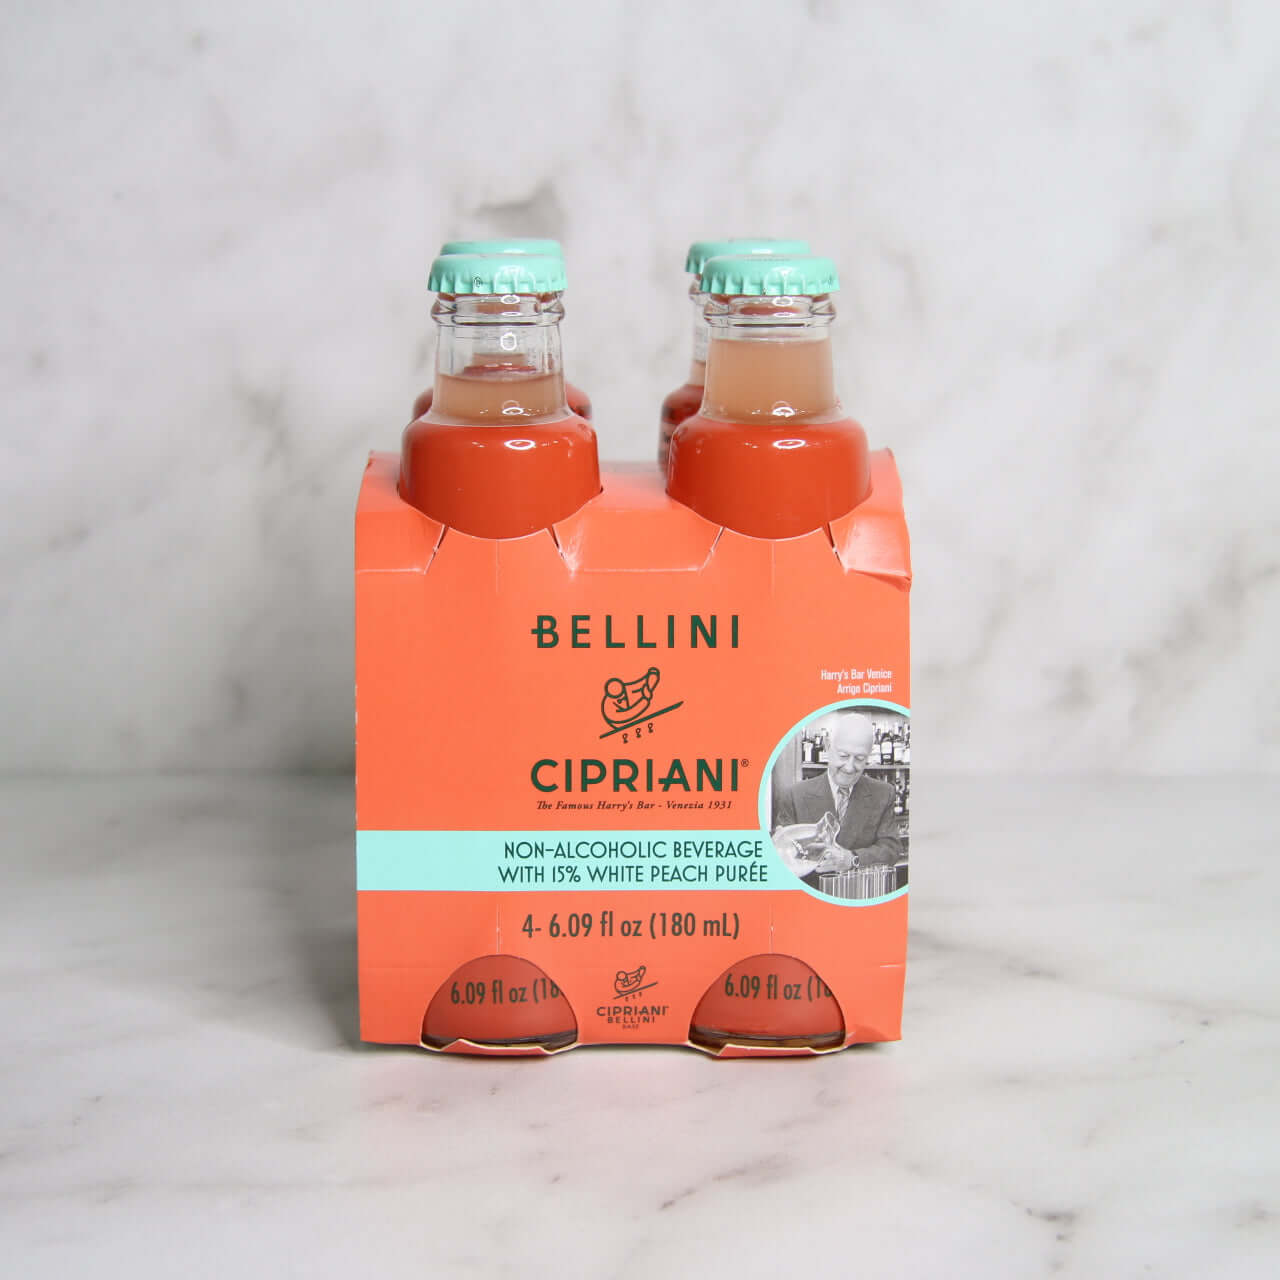 rich results on Google's SERP when searching for 'CIPRIANI BELLINI'